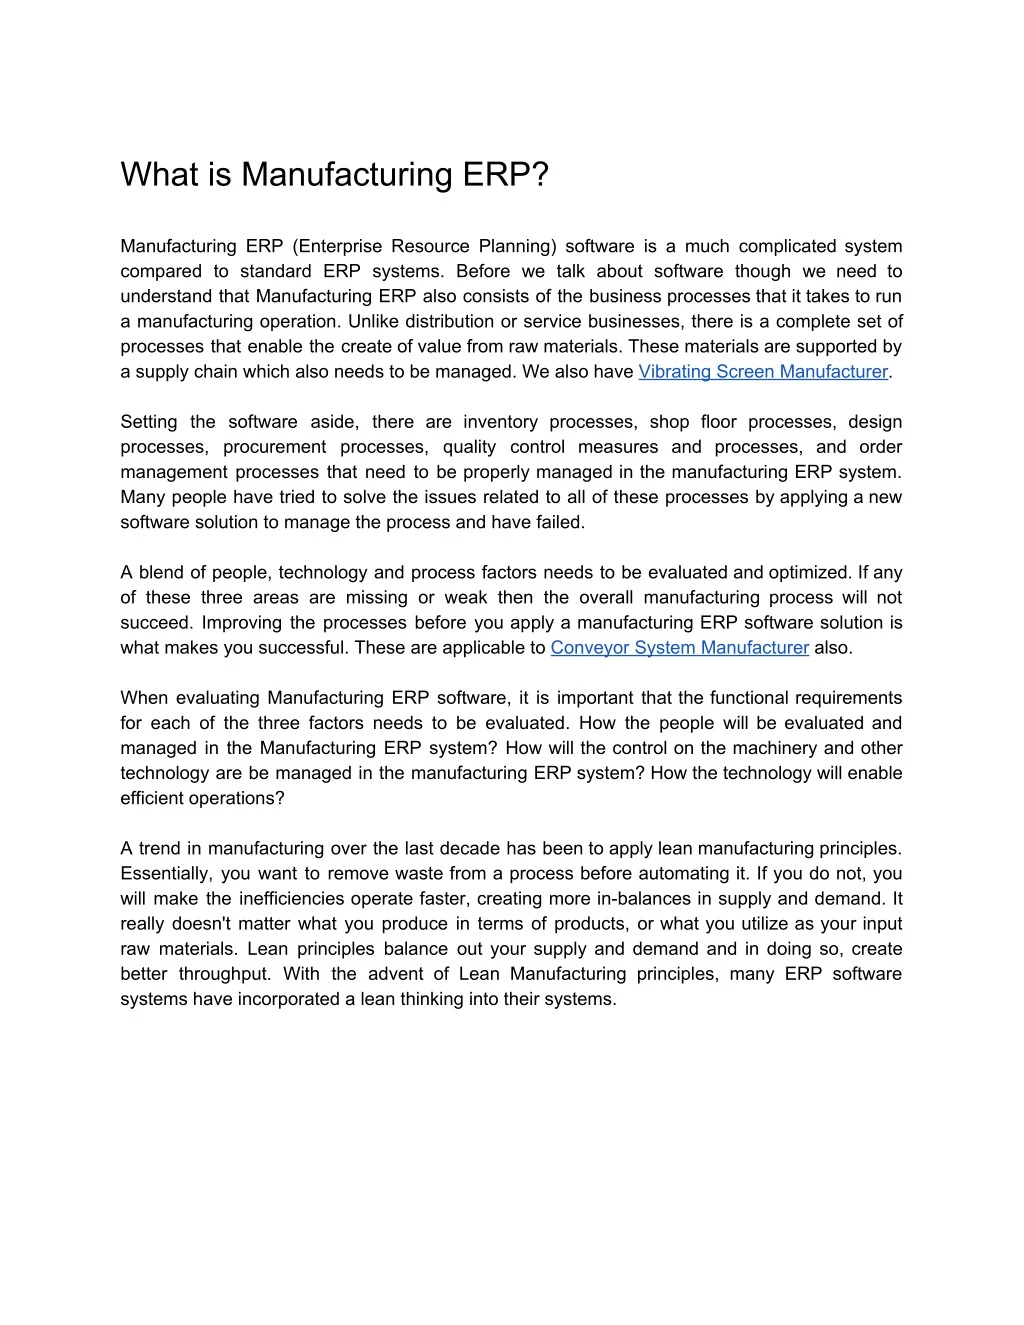 what is manufacturing erp